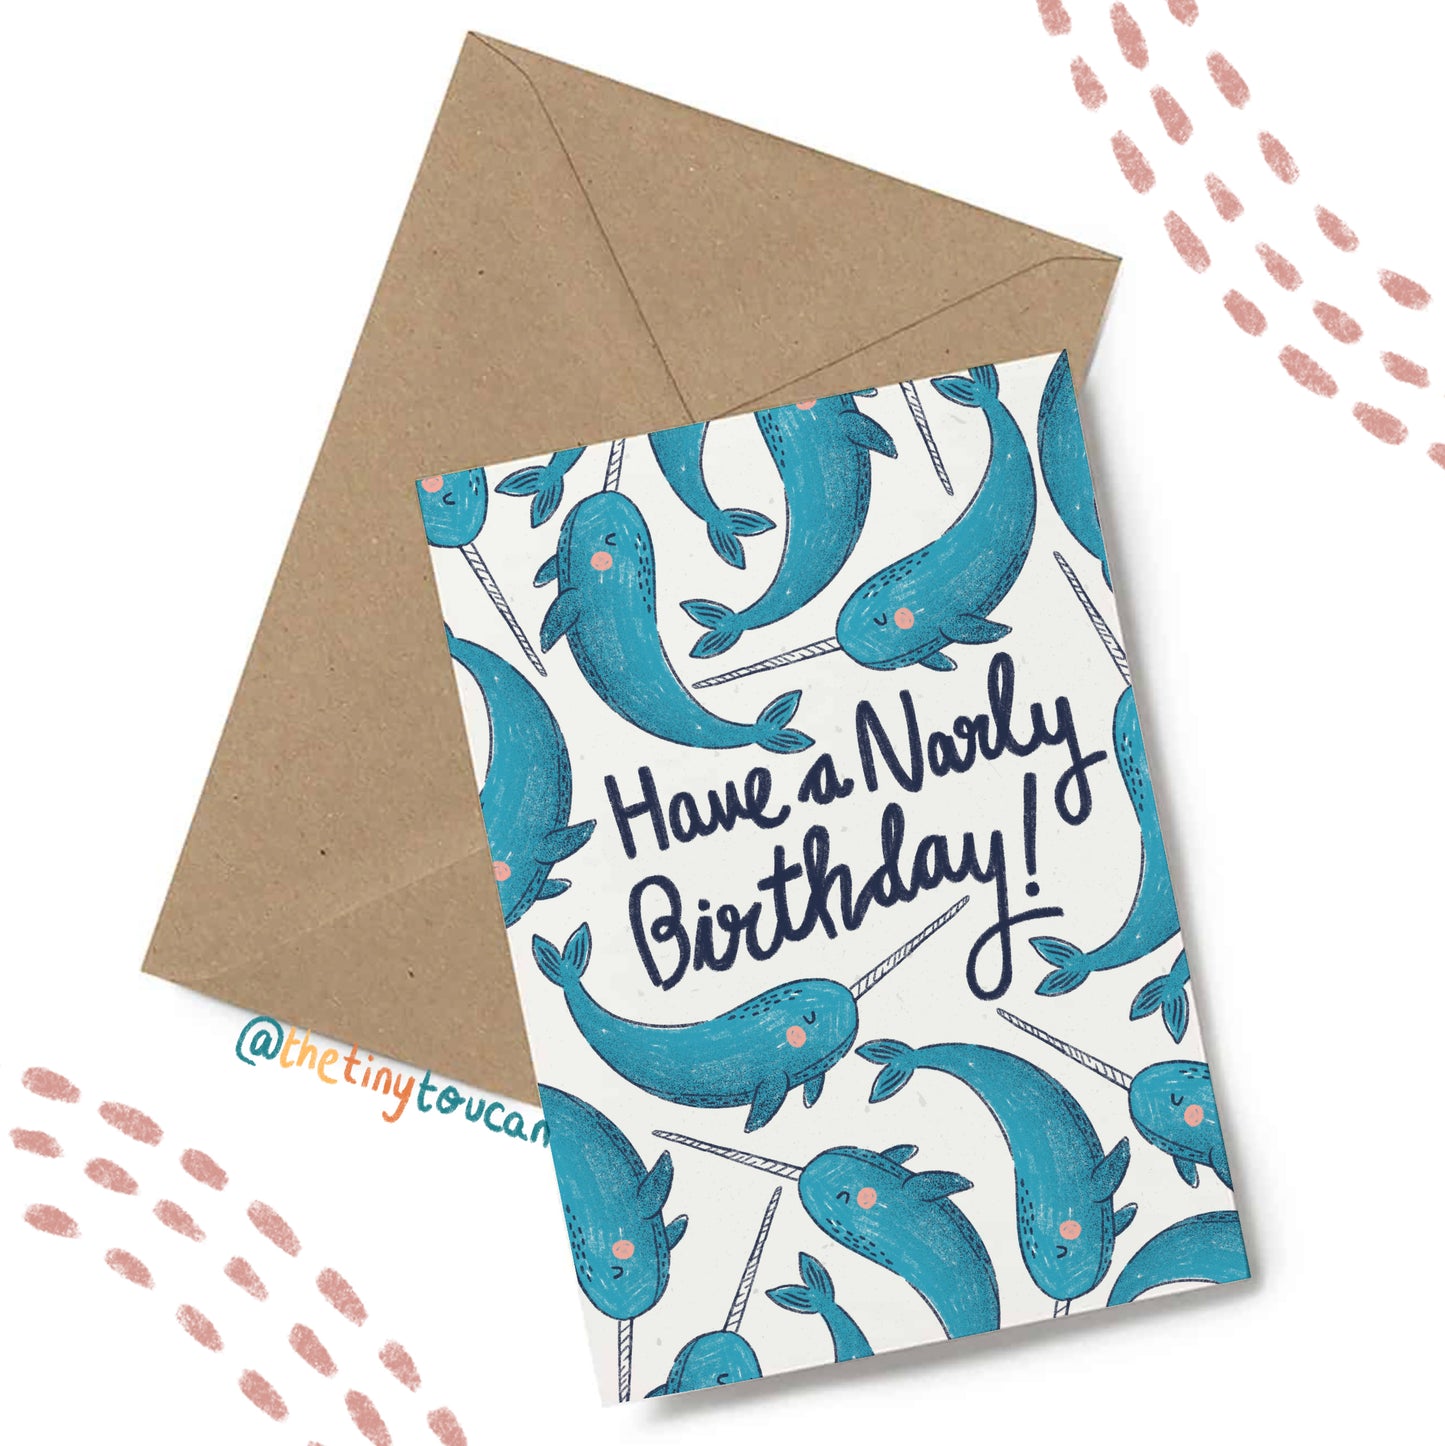 Narwhal Birthday Card